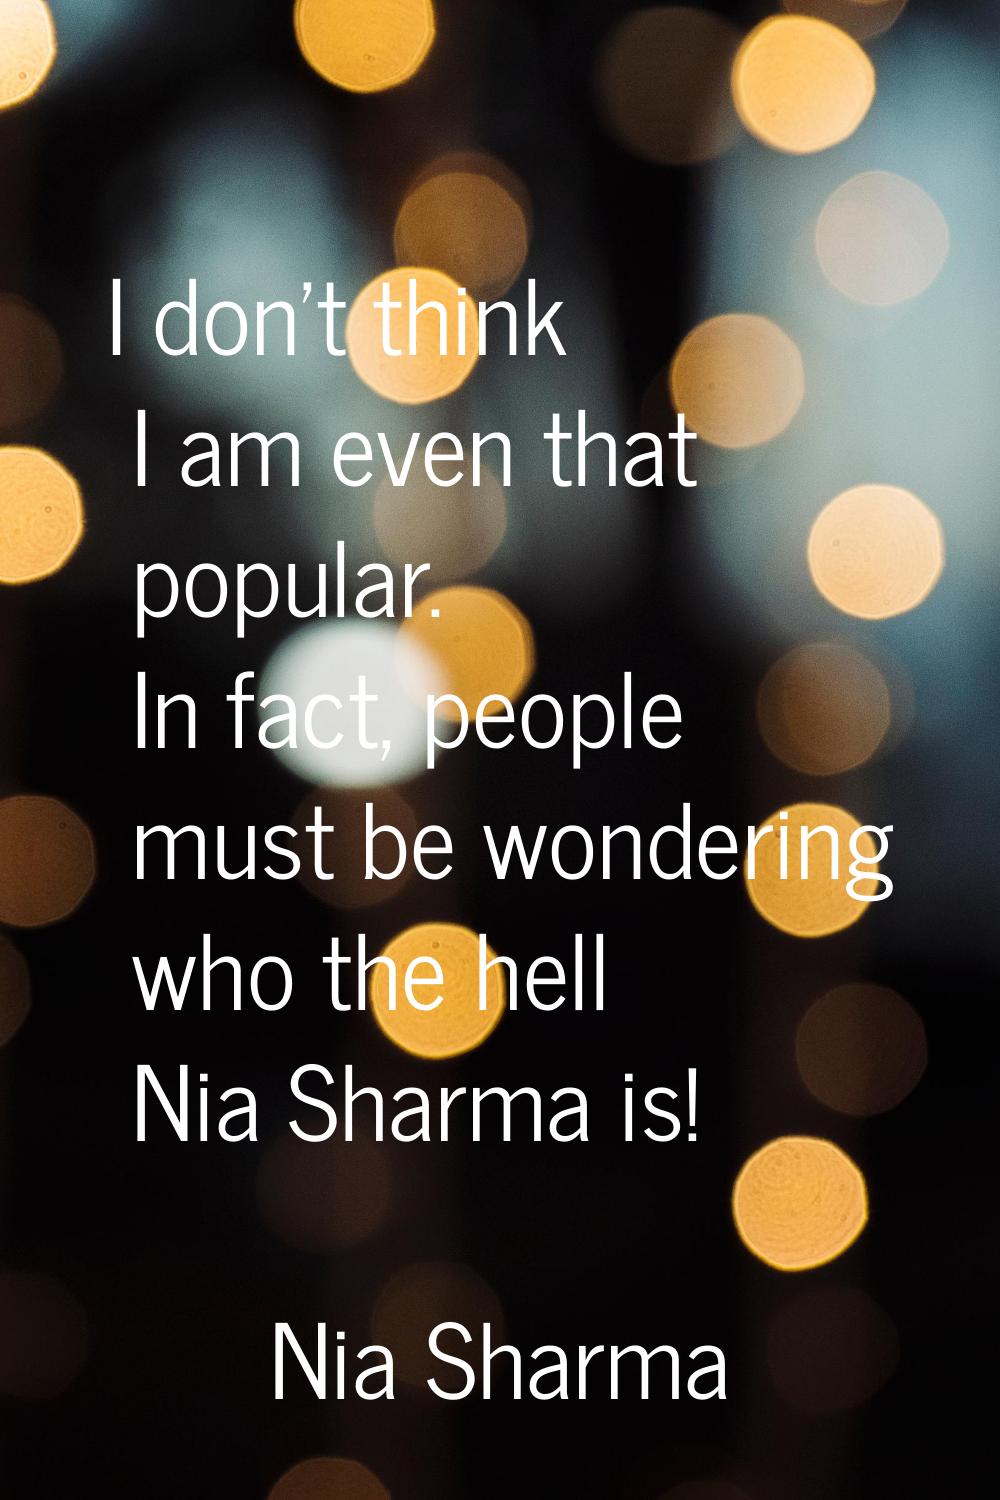 I don't think I am even that popular. In fact, people must be wondering who the hell Nia Sharma is!